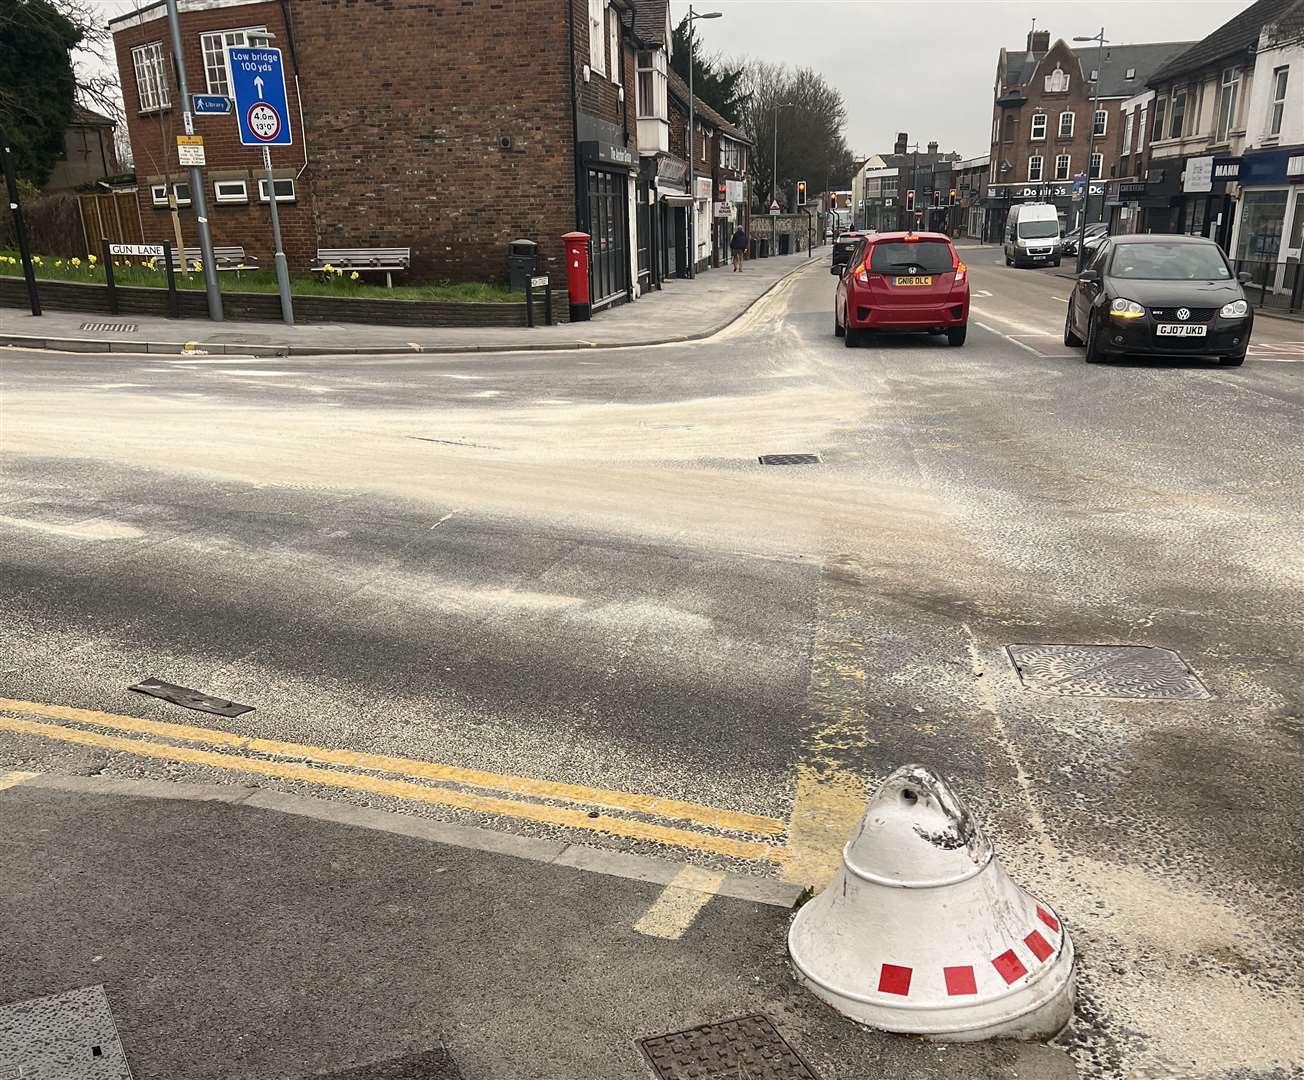 There was another accident just after the red markers were put on the bollard